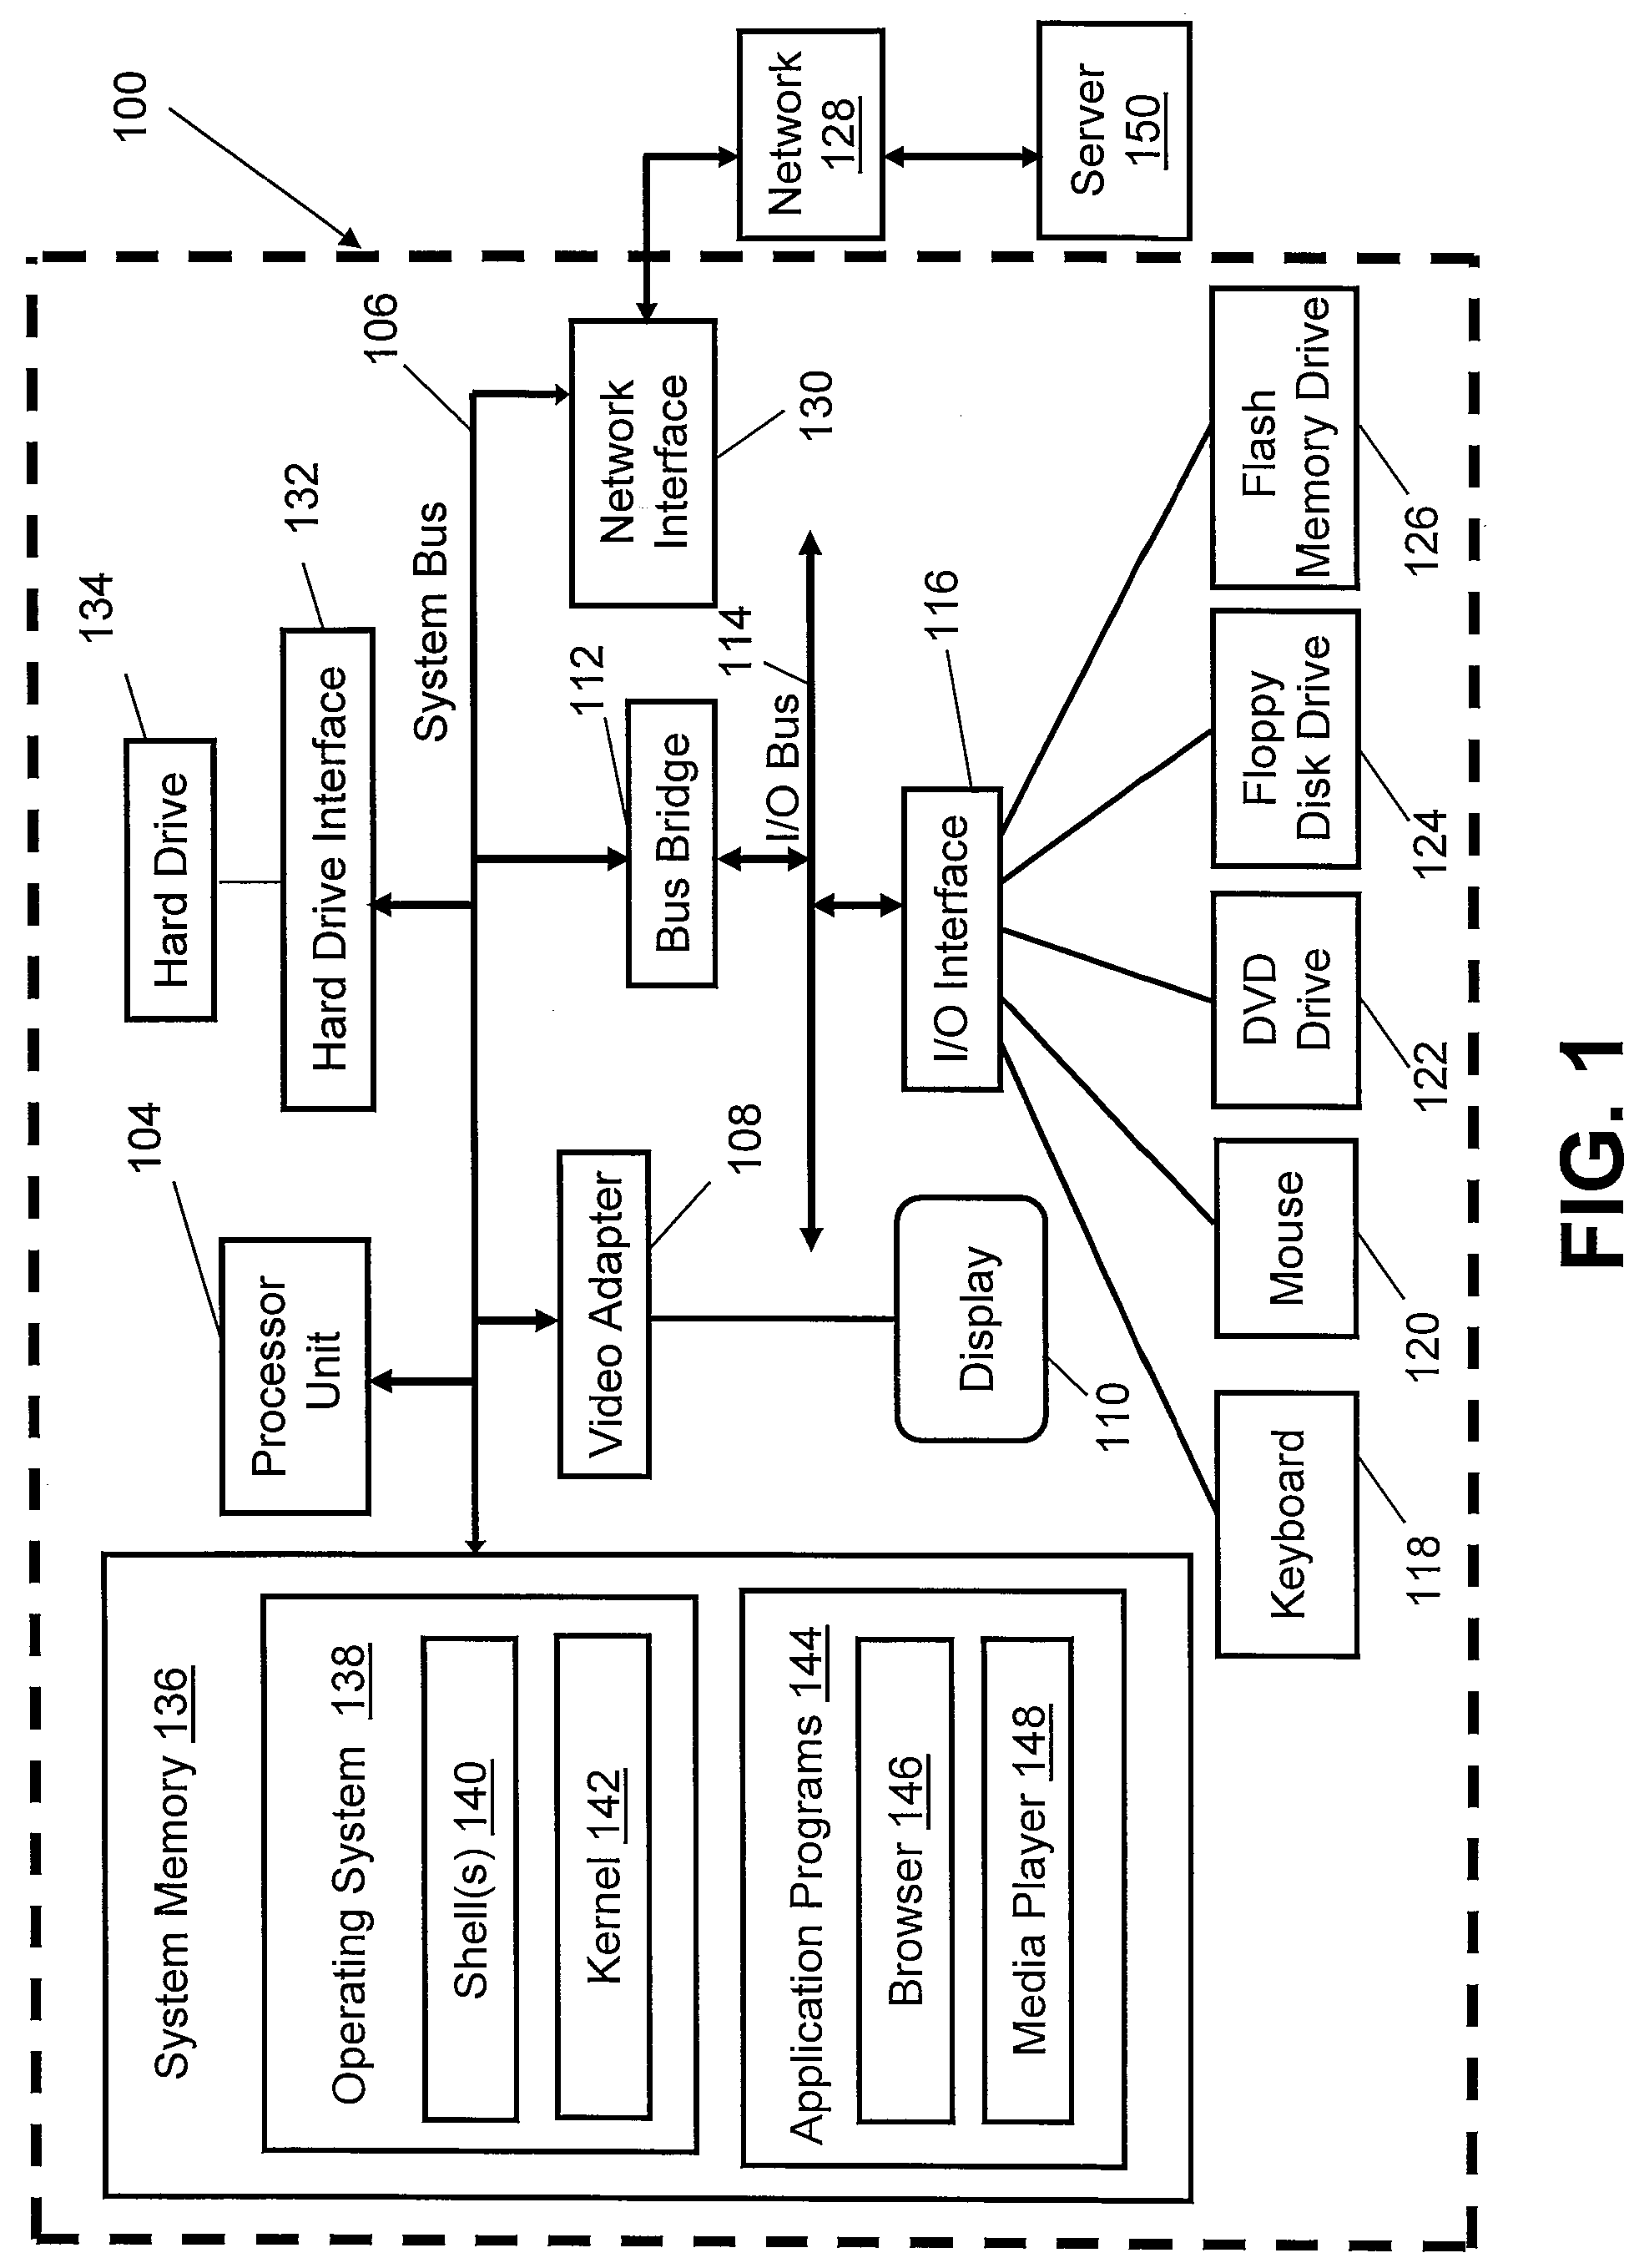 Method, system and program product for associating threads within non-related processes based on memory paging behaviors